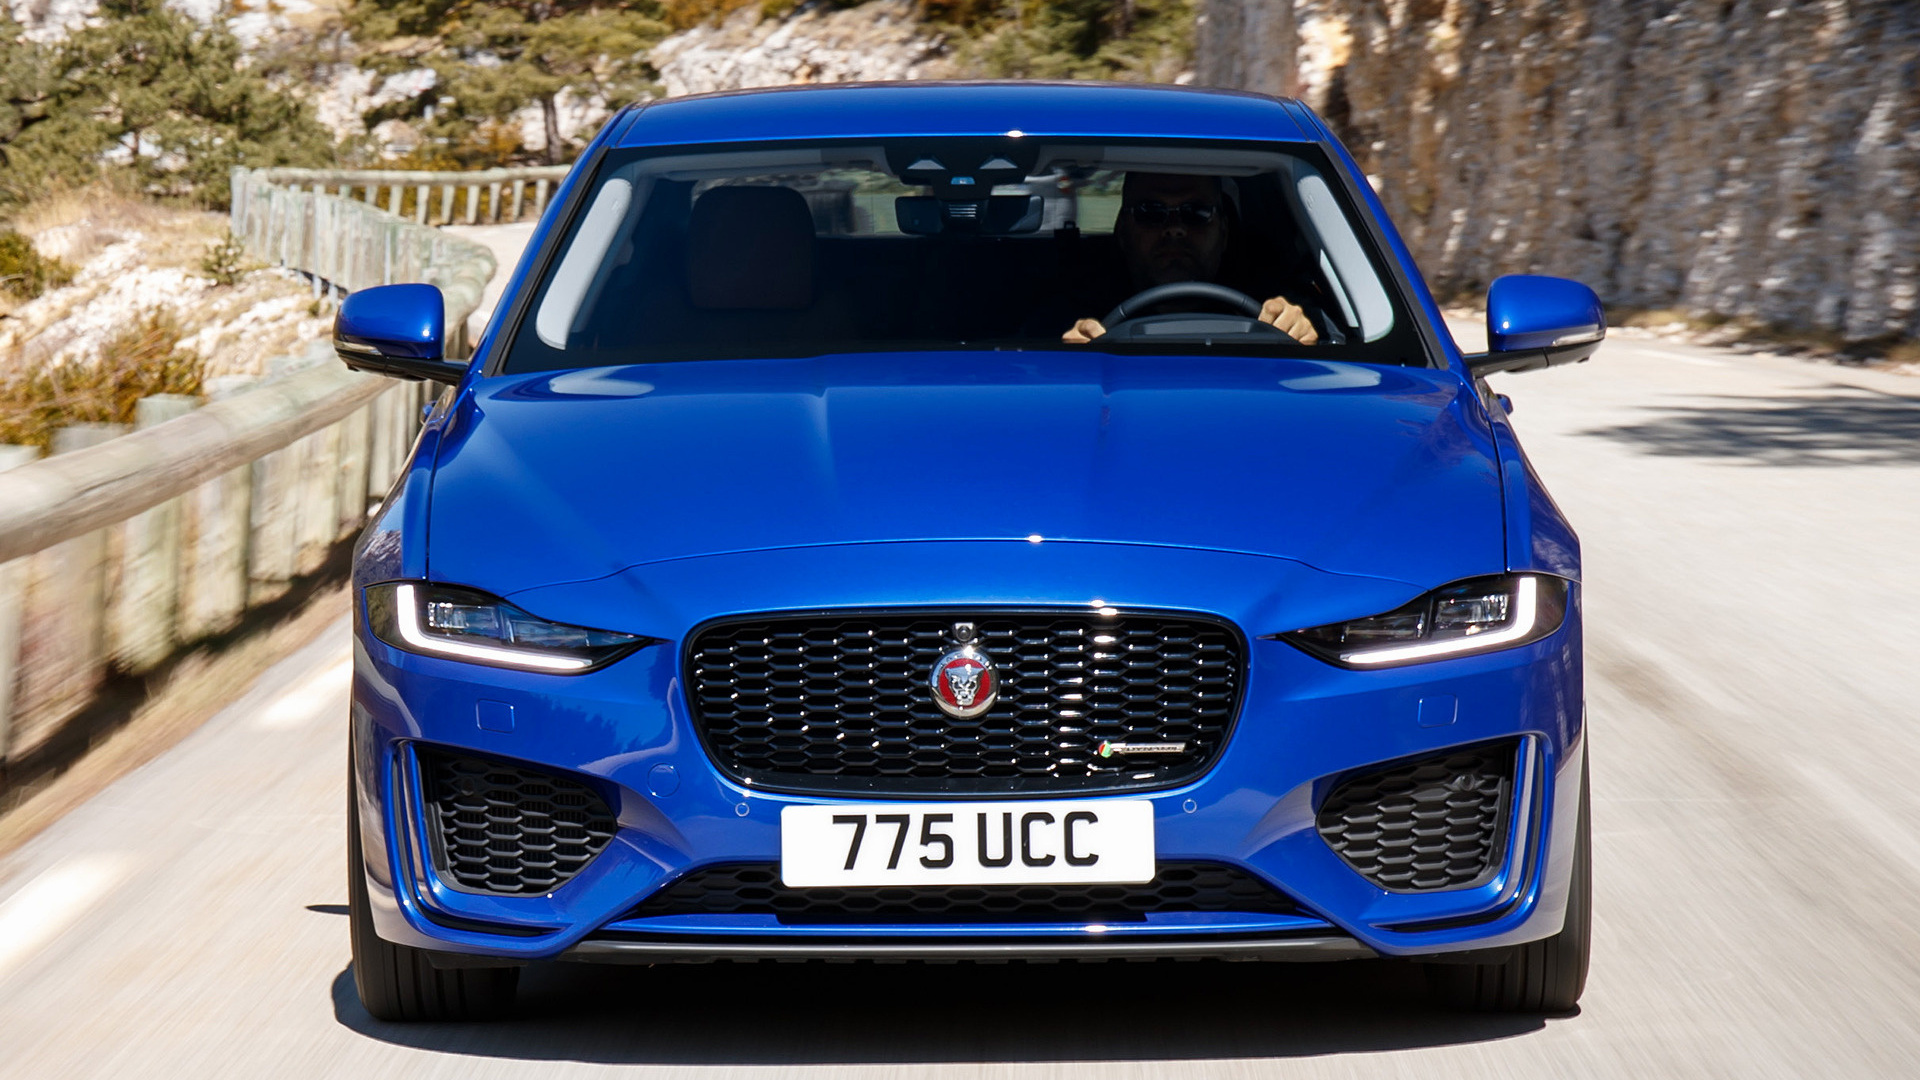 2019 Jaguar XE R-Dynamic - Wallpapers and HD Images | Car ...